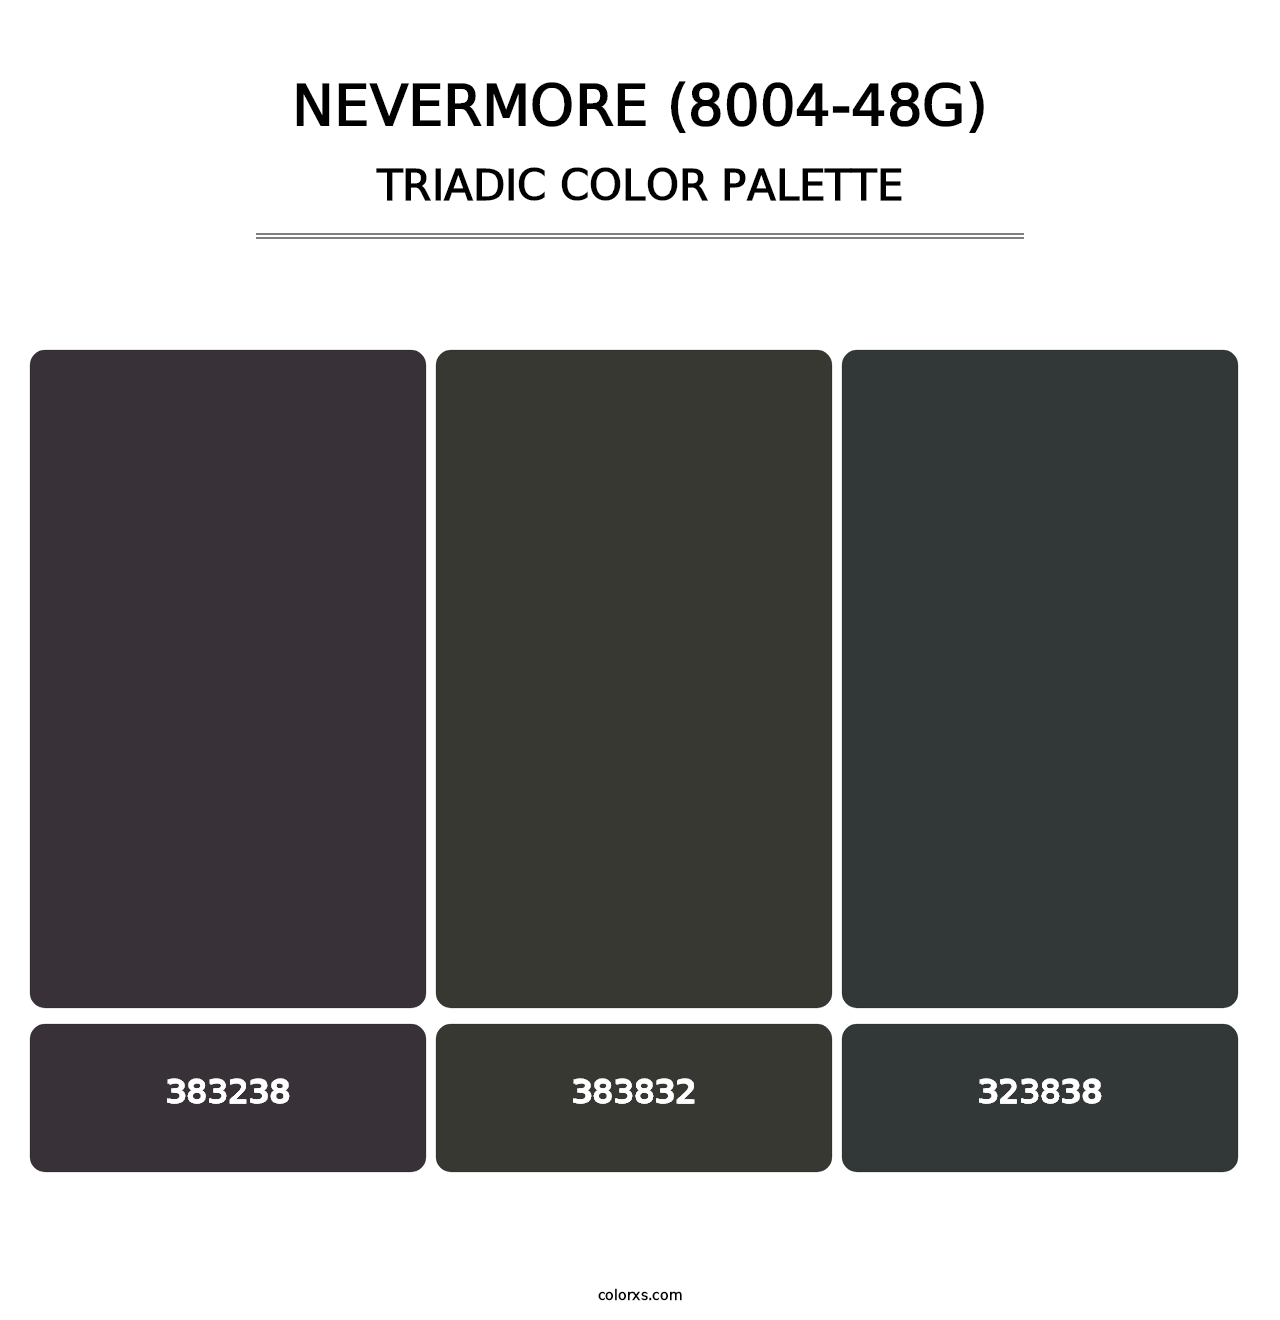 Nevermore (8004-48G) - Triadic Color Palette